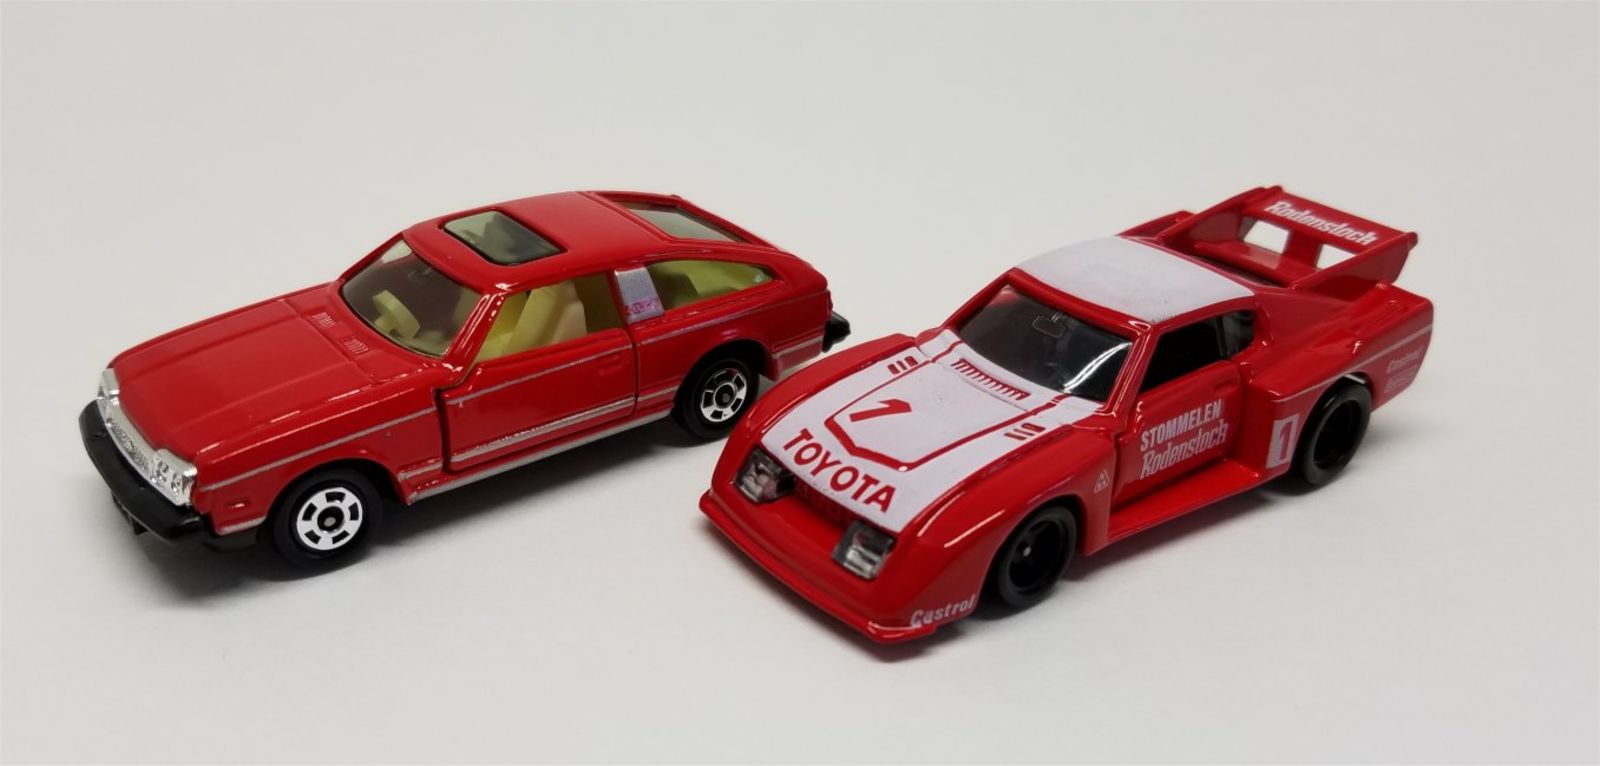 Illustration for article titled Surprise Saturday - Tomica Toyota Celica family reunion